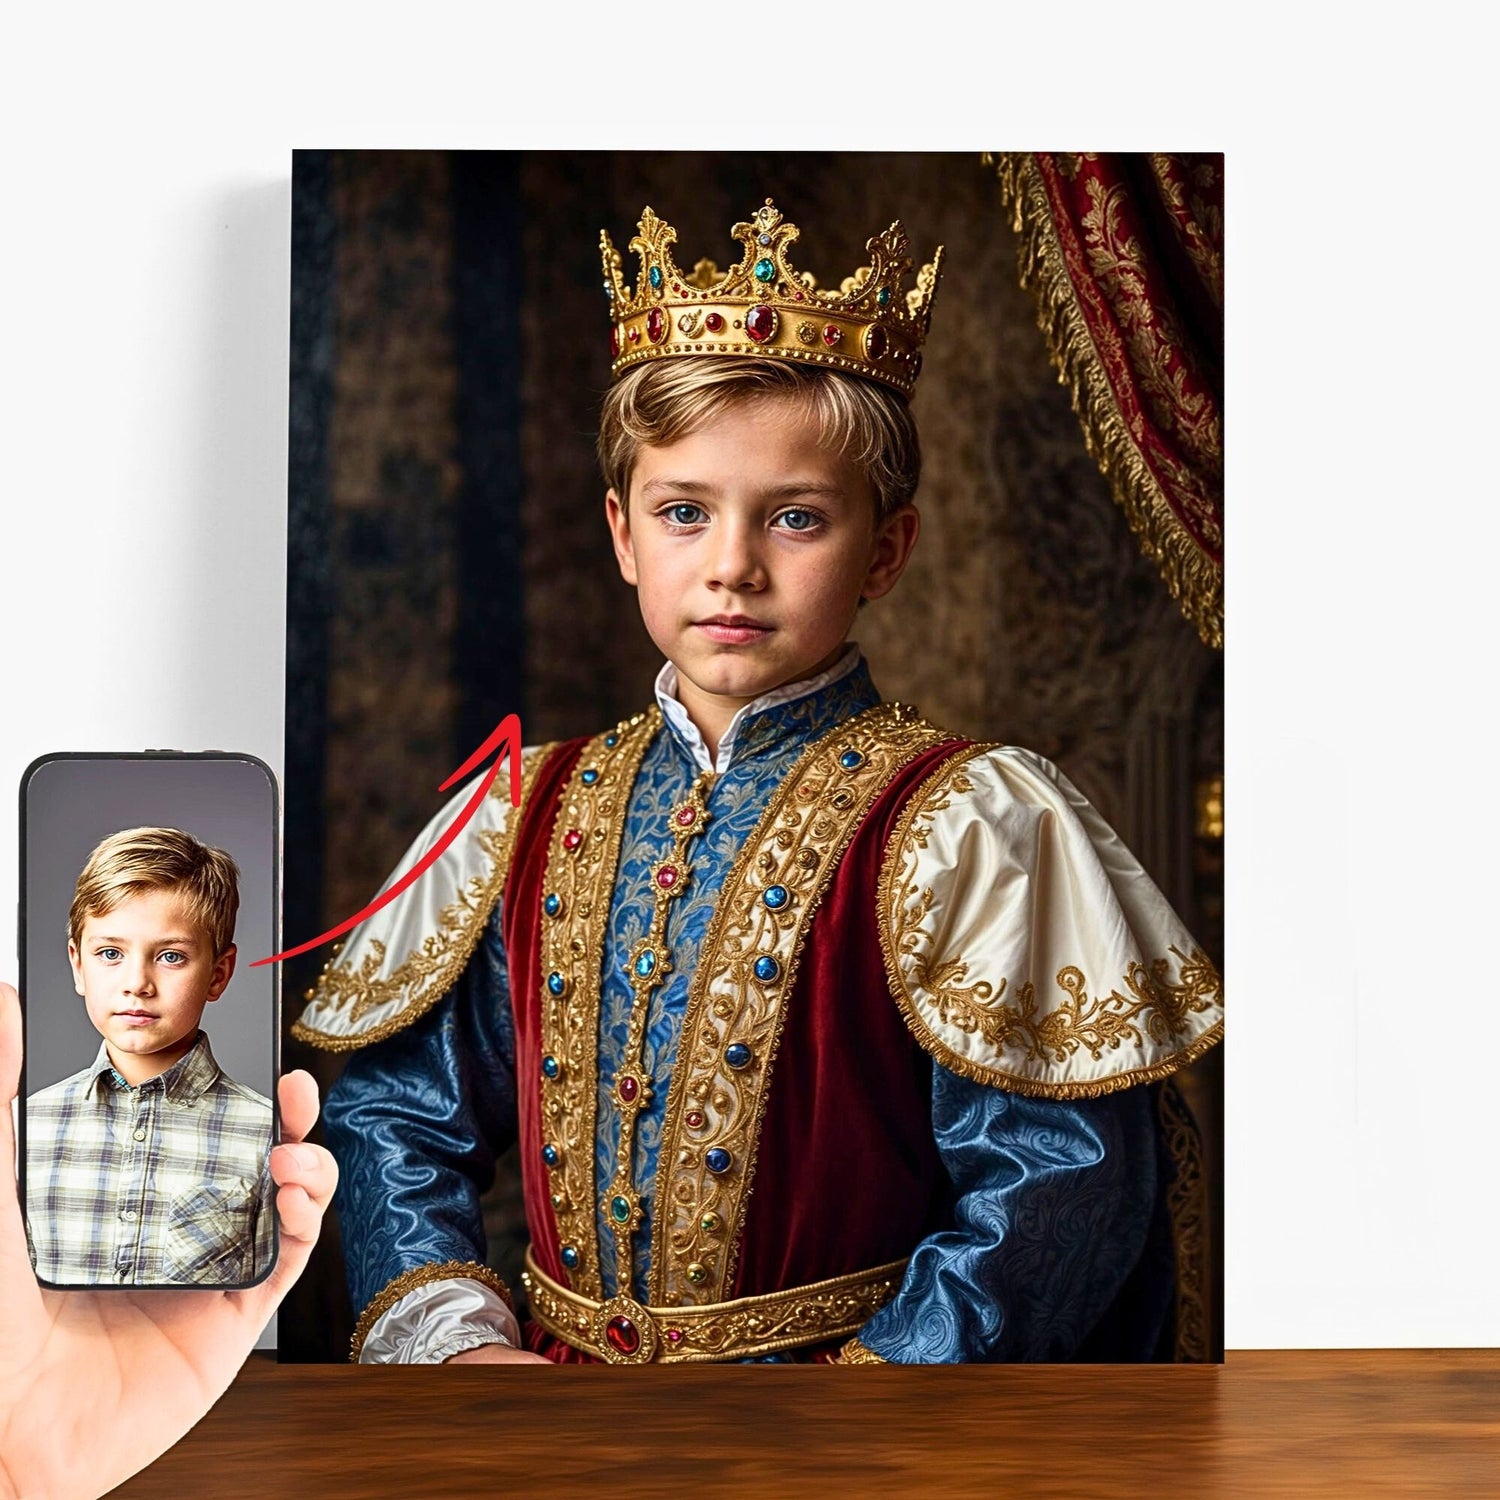 Custom Kid Royal Portrait, Transform your child's photo into an enchanting royal portrait with our custom service.